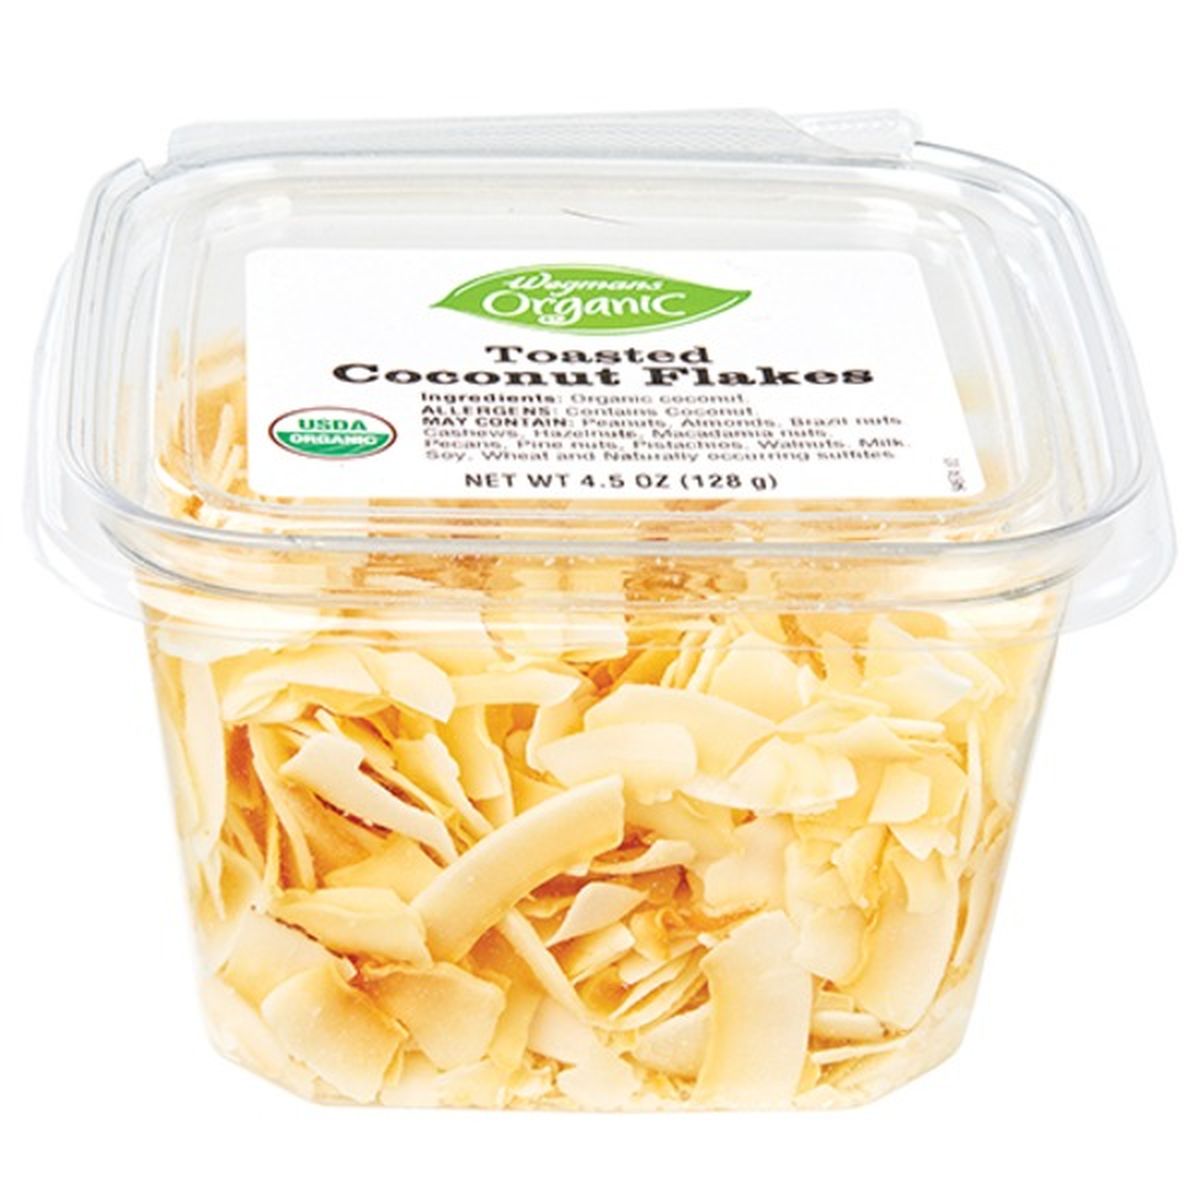 Calories in Wegmans Organic Toasted Coconut Flakes